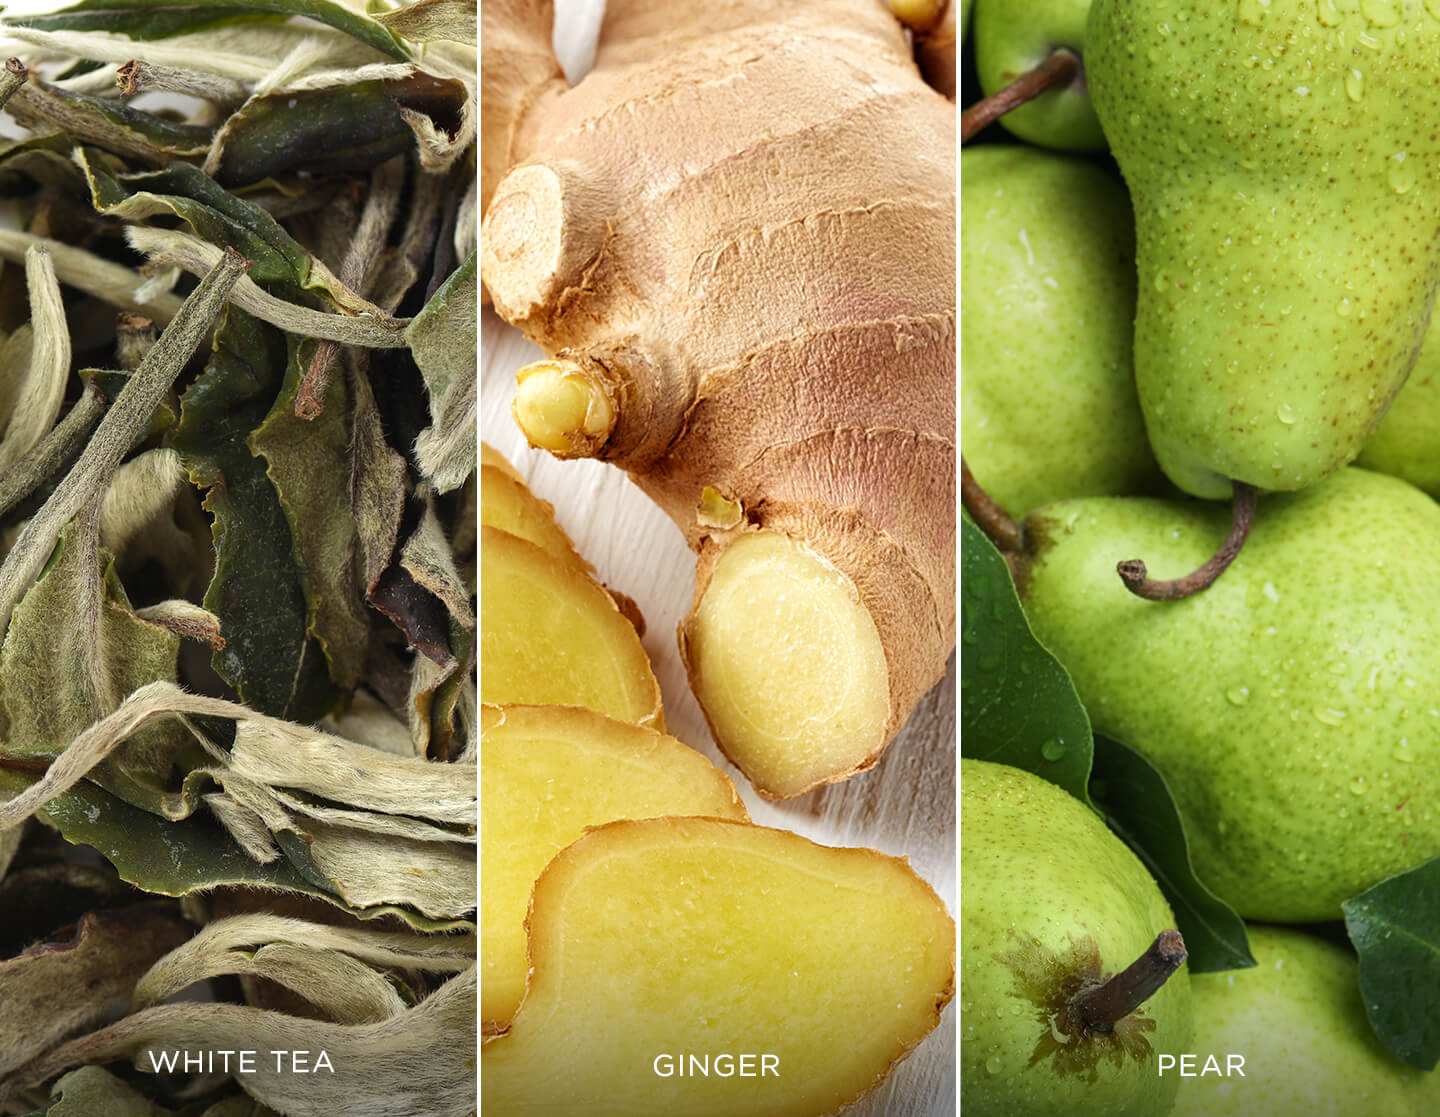 White Ginger Pear Ingredients: White tea, ginger and pear